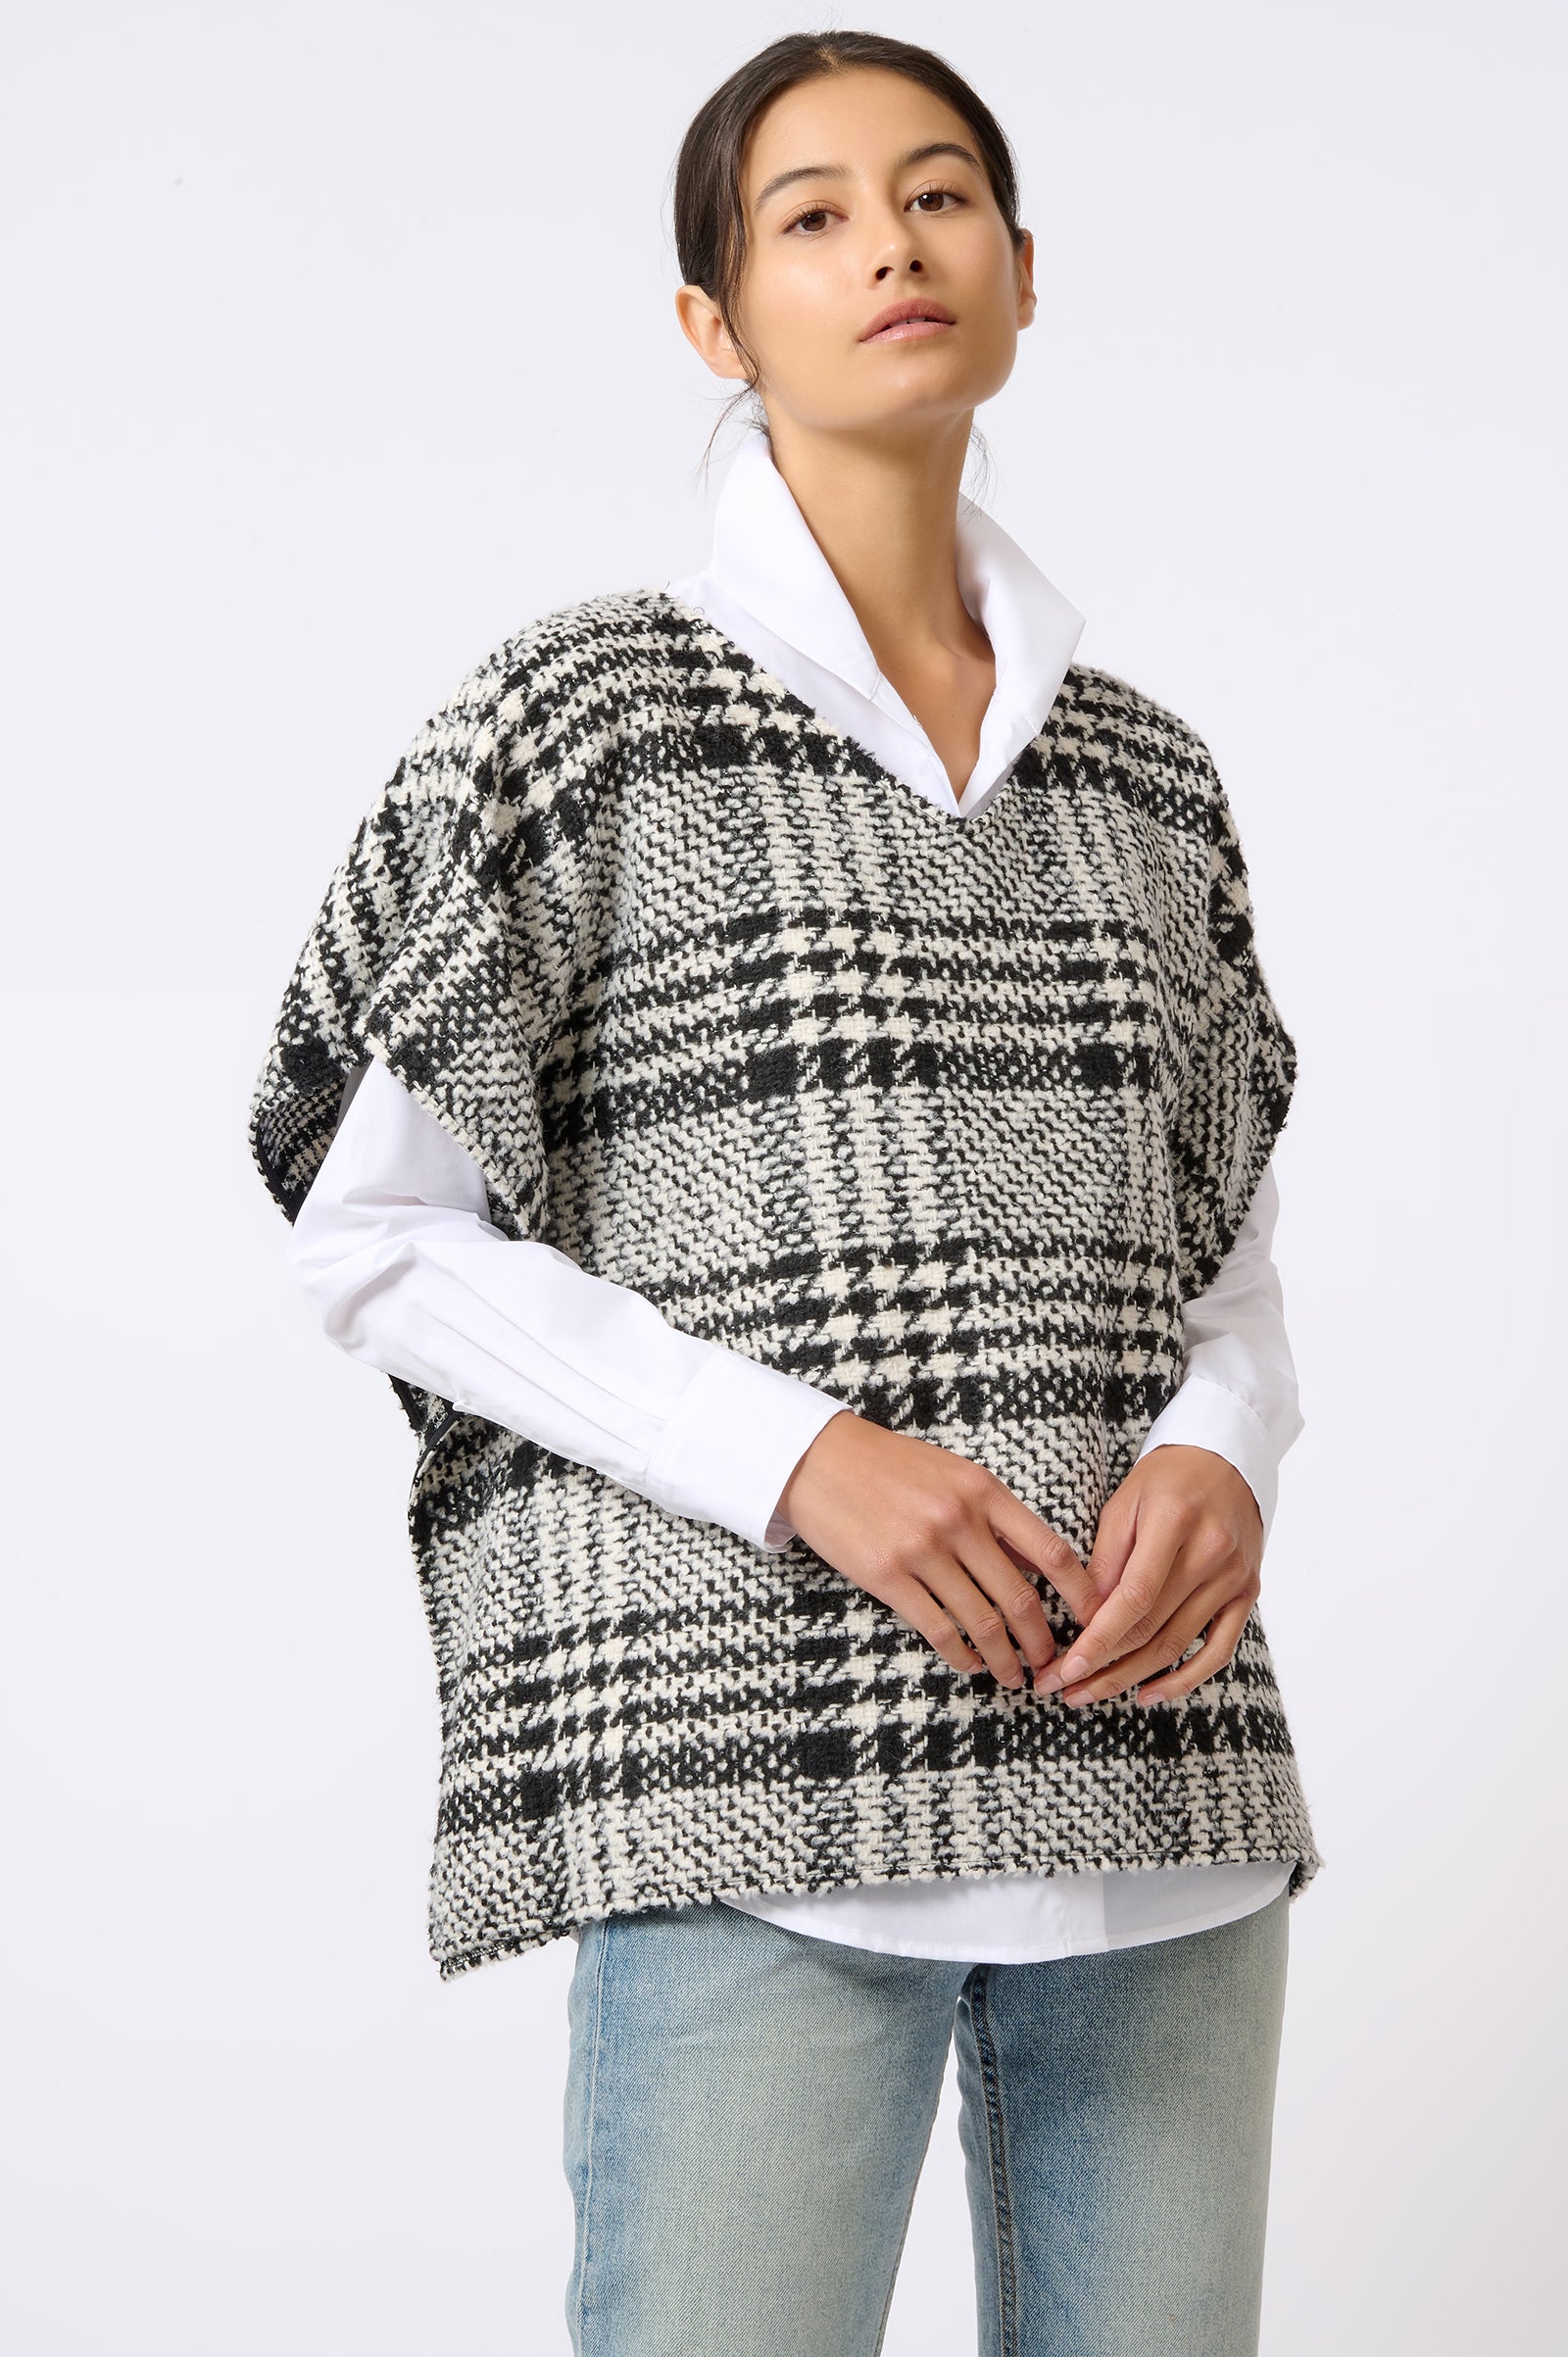 Kal Rieman Plaid Poncho in Black and White Plaid on Model with Hands in Front Front Side View